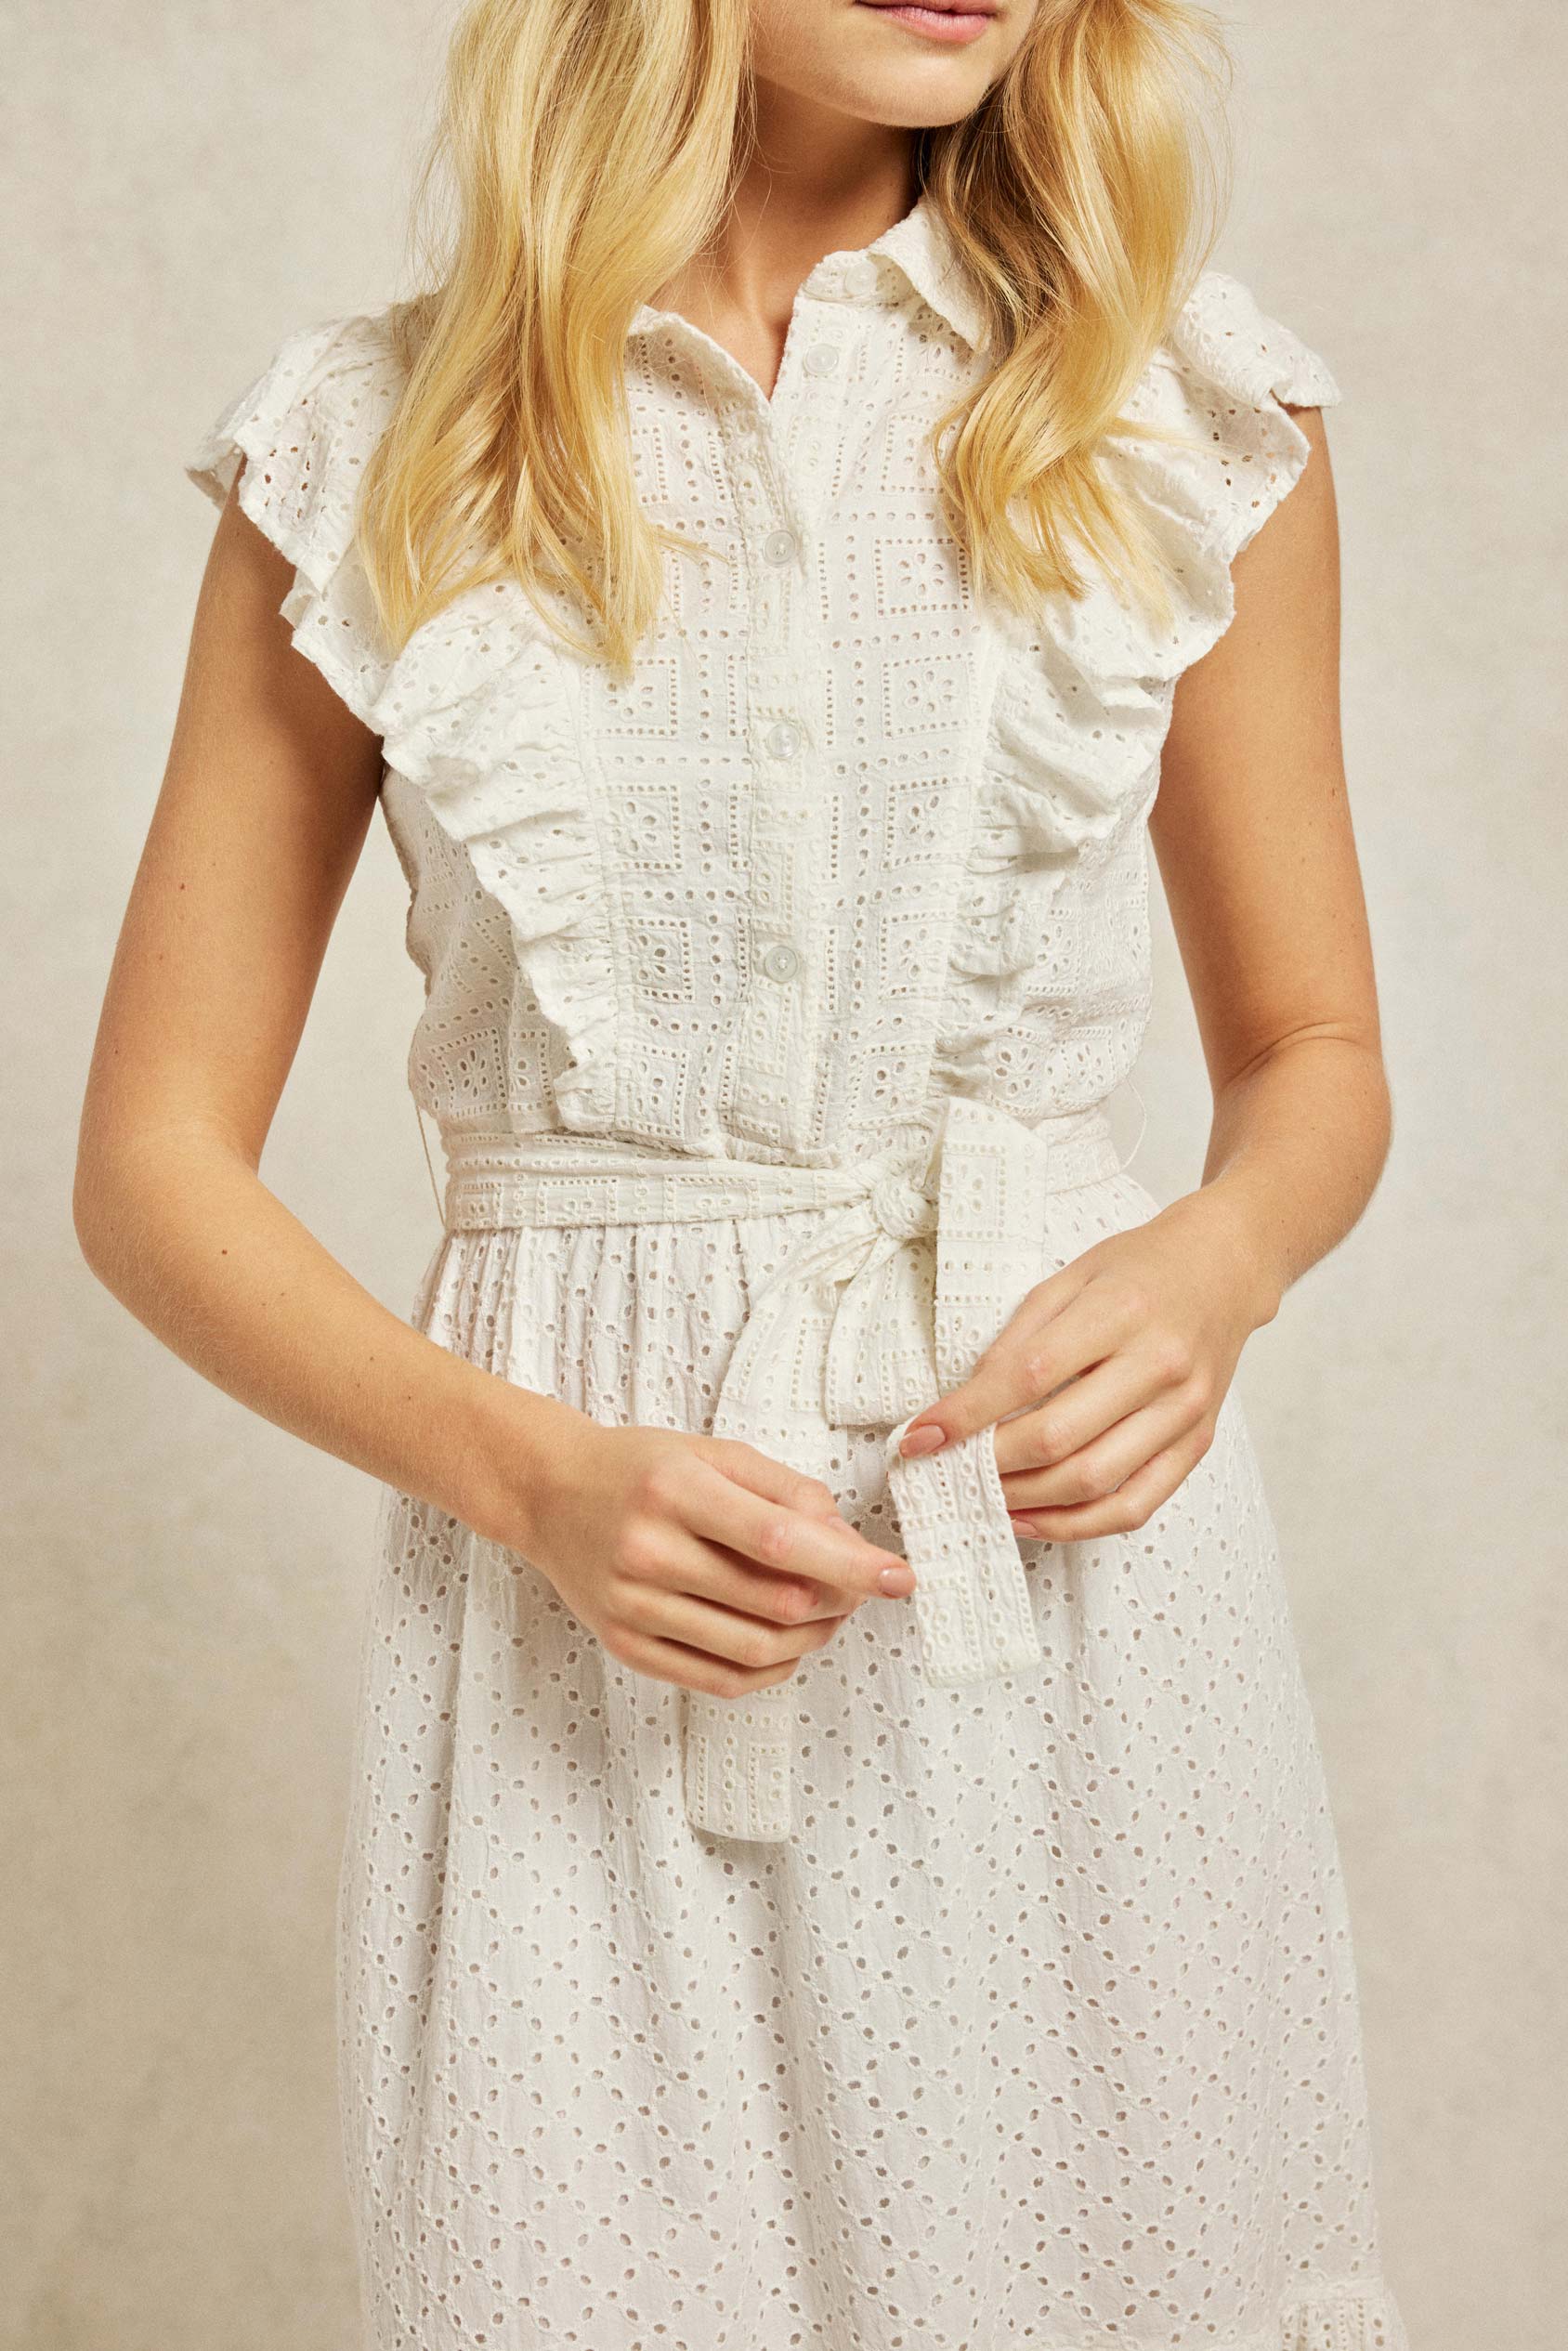 The Crocus features ruffles which trim the design, cut from traditional broderie anglaise and fitted with a self-tie waist. Smart casual wear. Summer dress. Size 6,8,10,12,14,16,18. Machine wash.